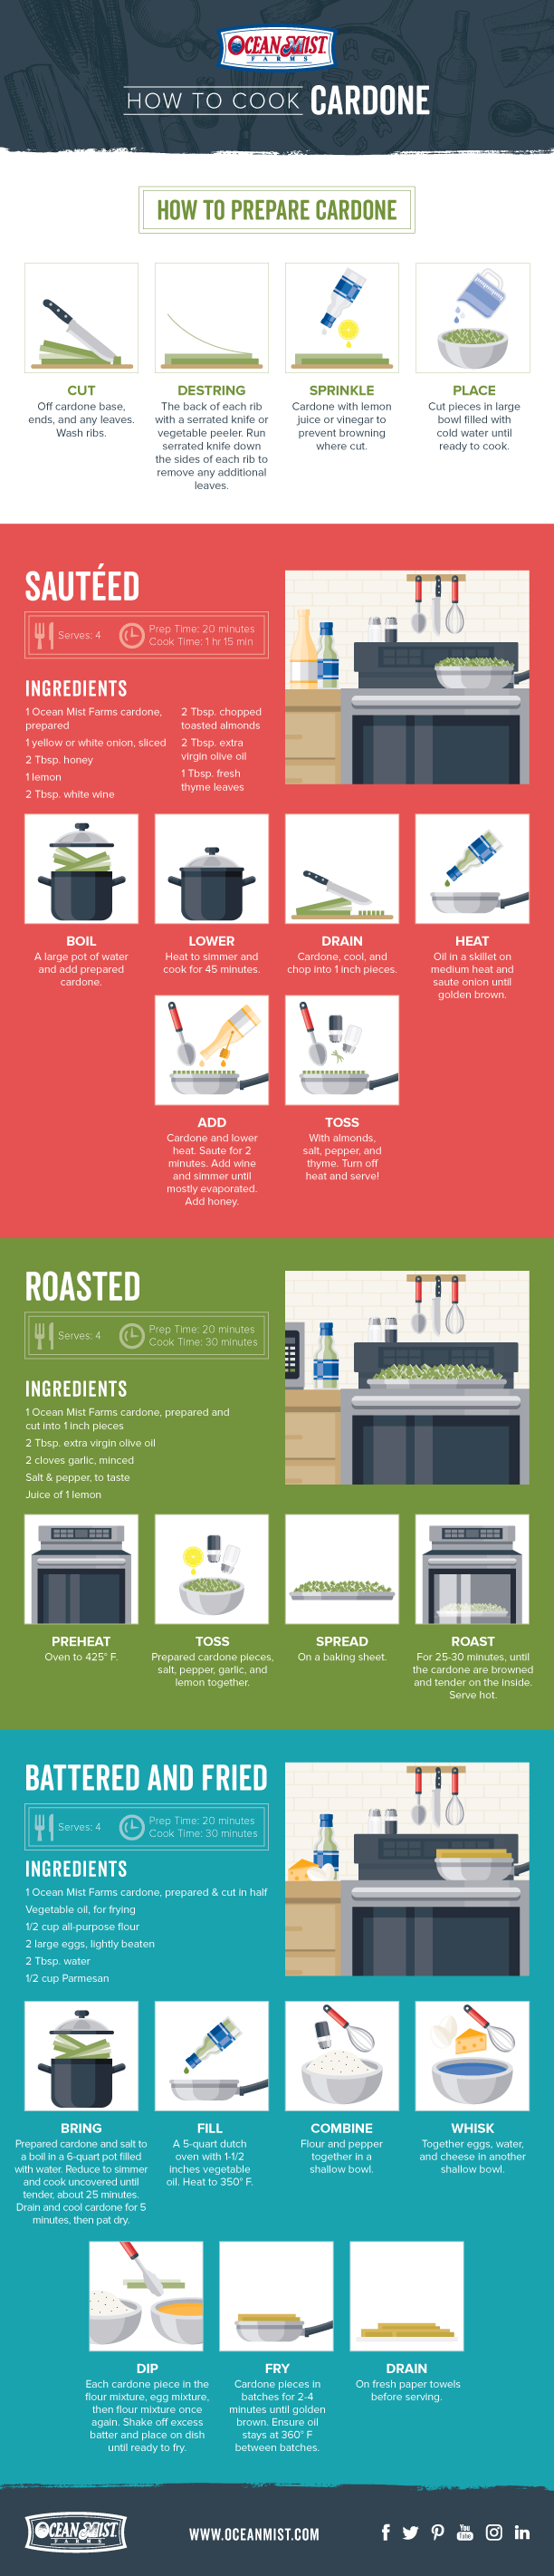 OM_How-to-Cook-Cardone_Infographic